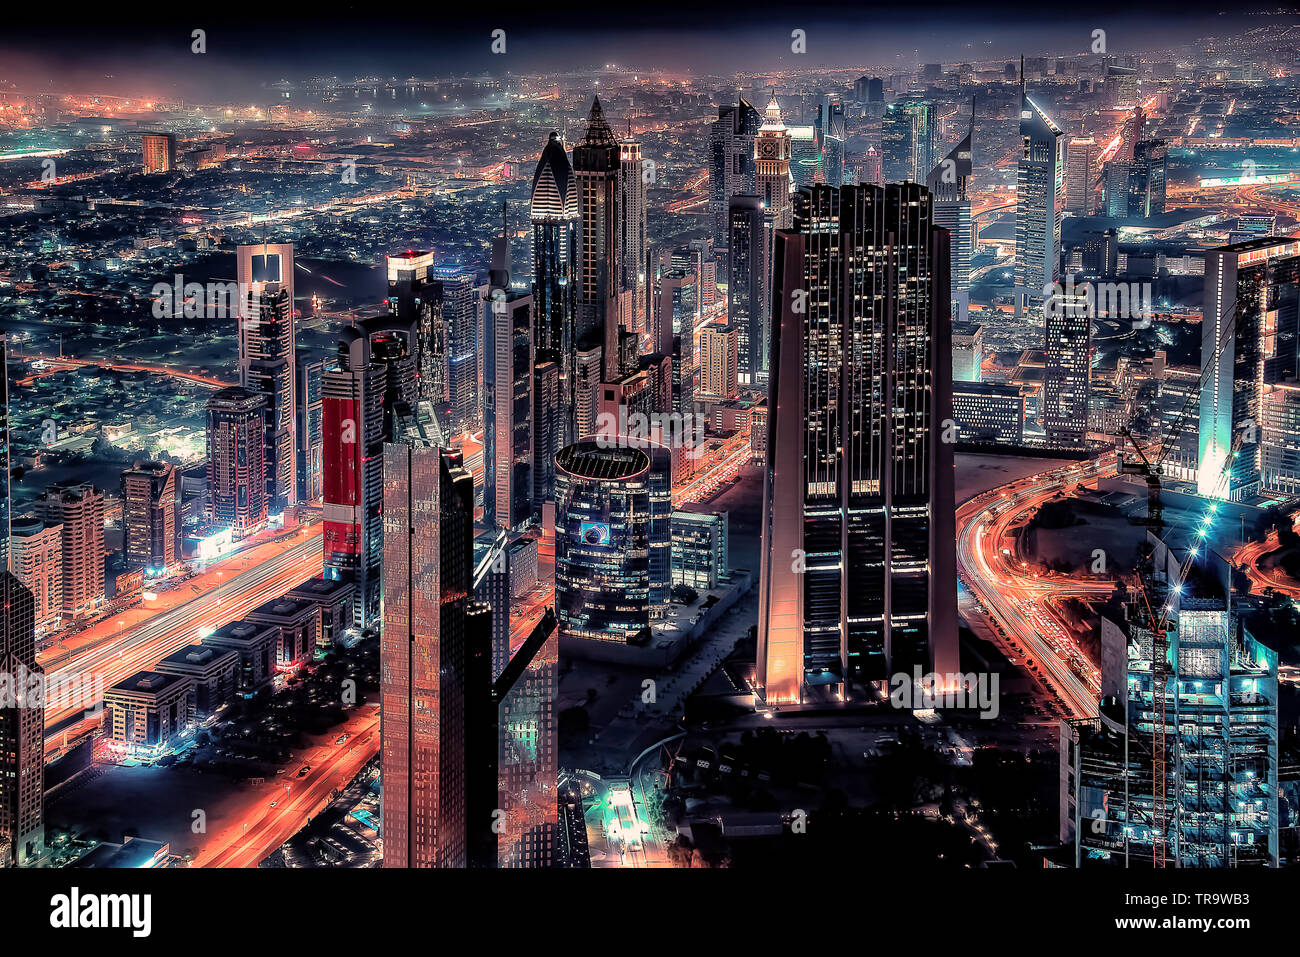 Dubai cityscape with the famous Sheikh Zayed Road Stock Photo